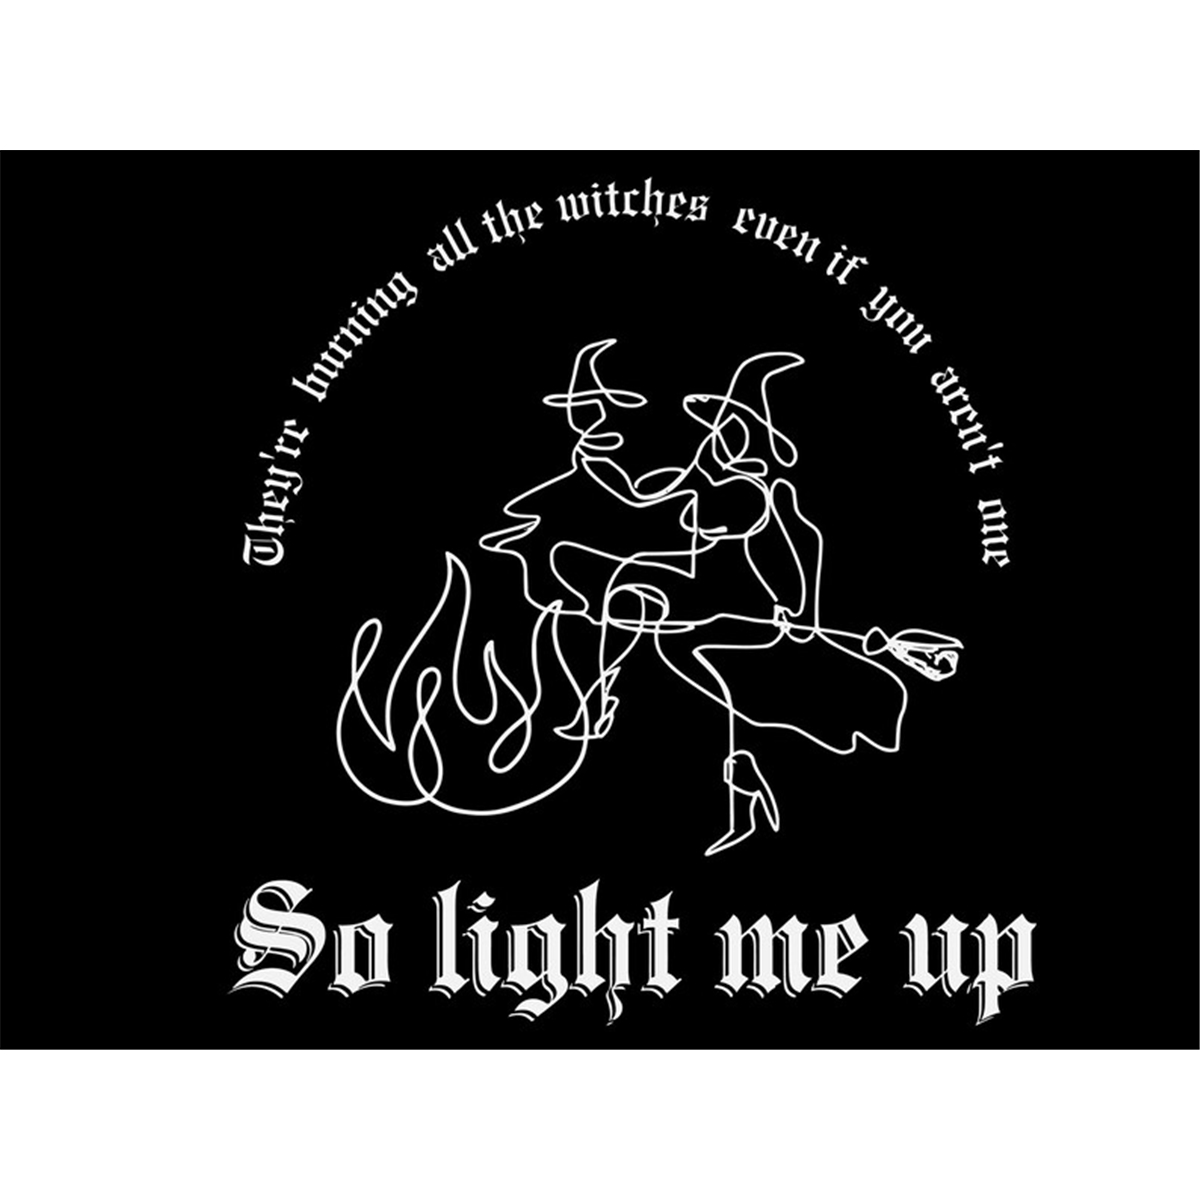 they-are-burning-all-the-witches-taylor-swift-svg-cricut-file-image-1